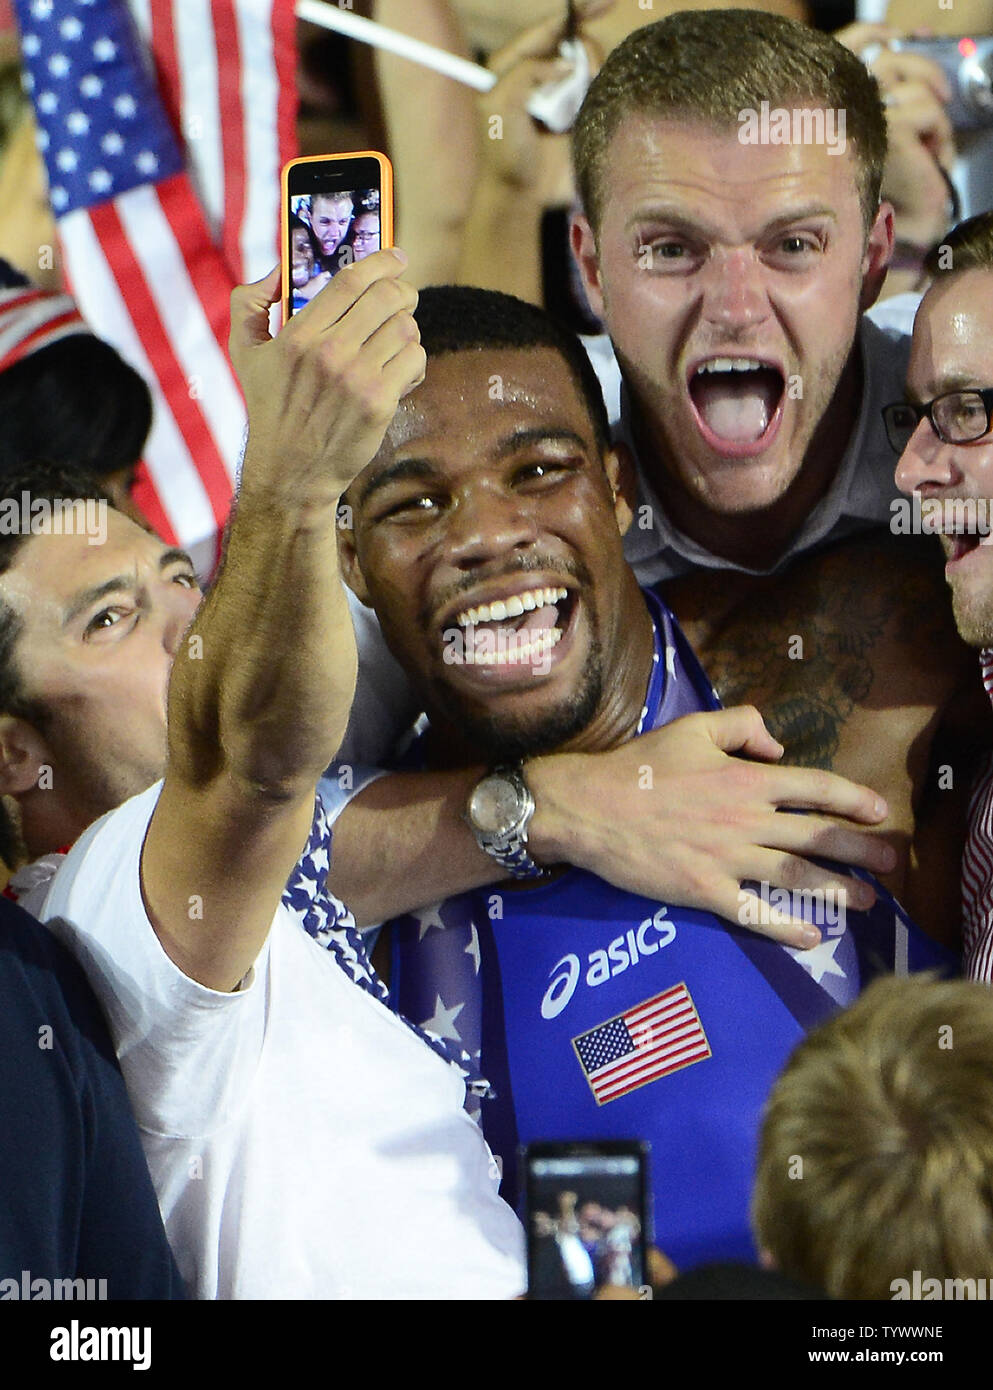 Jordan Ernest Burroughs of the United States of America celebrates with fans in the crowd after winning the Gold Medal in the Men's 74kg Freestyle Wrestling against Sadegh Saeed Goudarzi of Iran at the London 2012 Summer Olympics on August 10, 2012 in London.  UPI/Ron Sachs Stock Photo